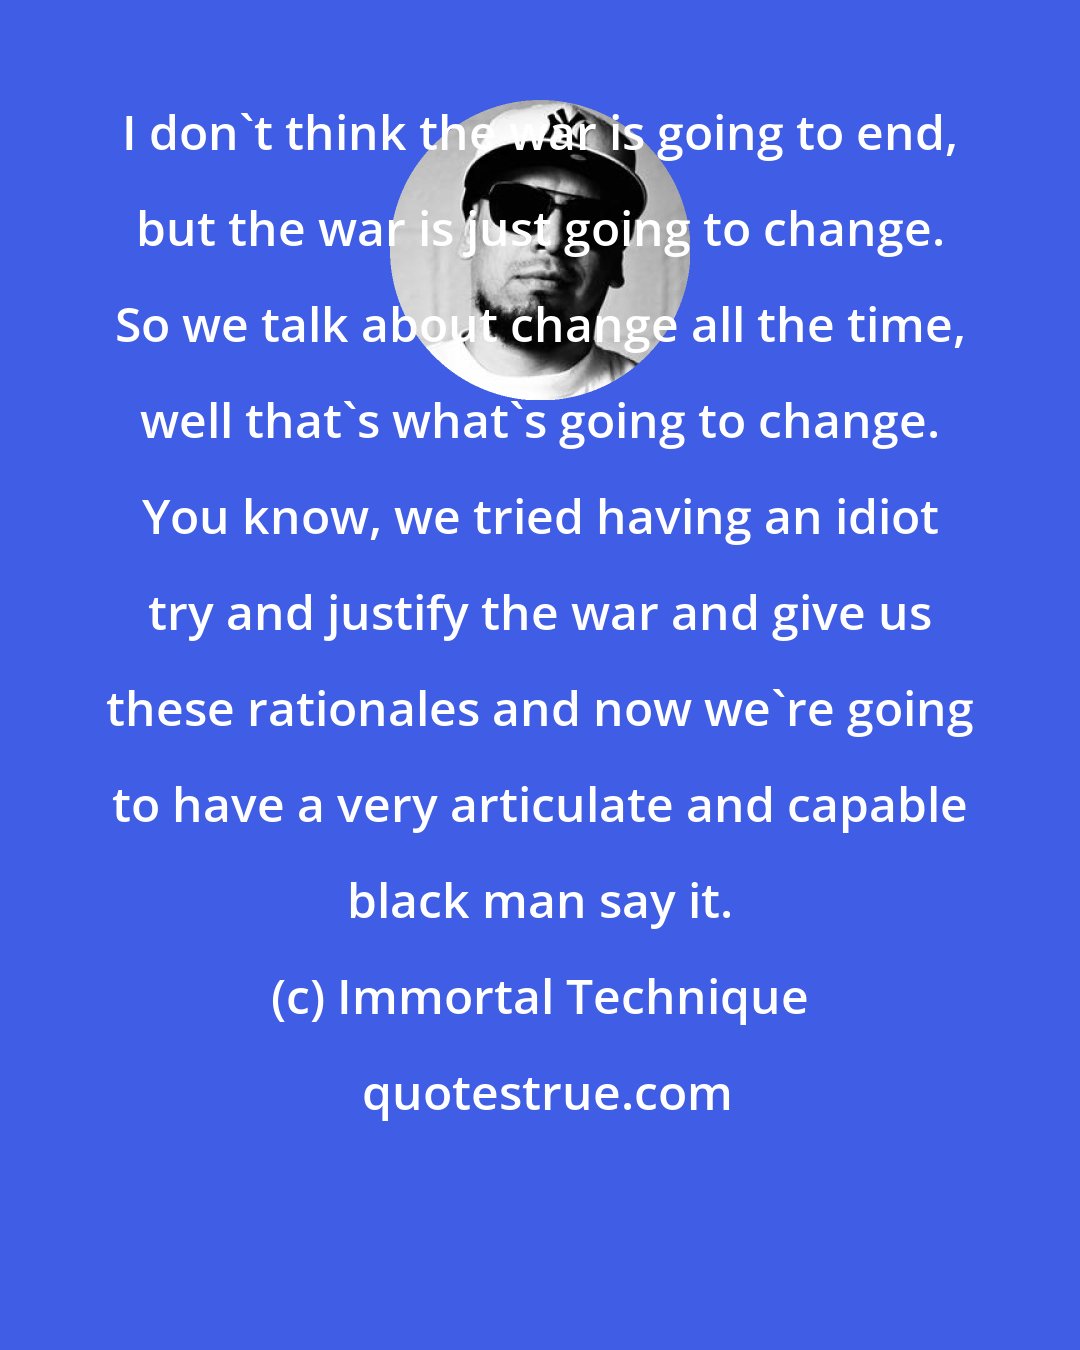 Immortal Technique: I don't think the war is going to end, but the war is just going to change. So we talk about change all the time, well that's what's going to change. You know, we tried having an idiot try and justify the war and give us these rationales and now we're going to have a very articulate and capable black man say it.